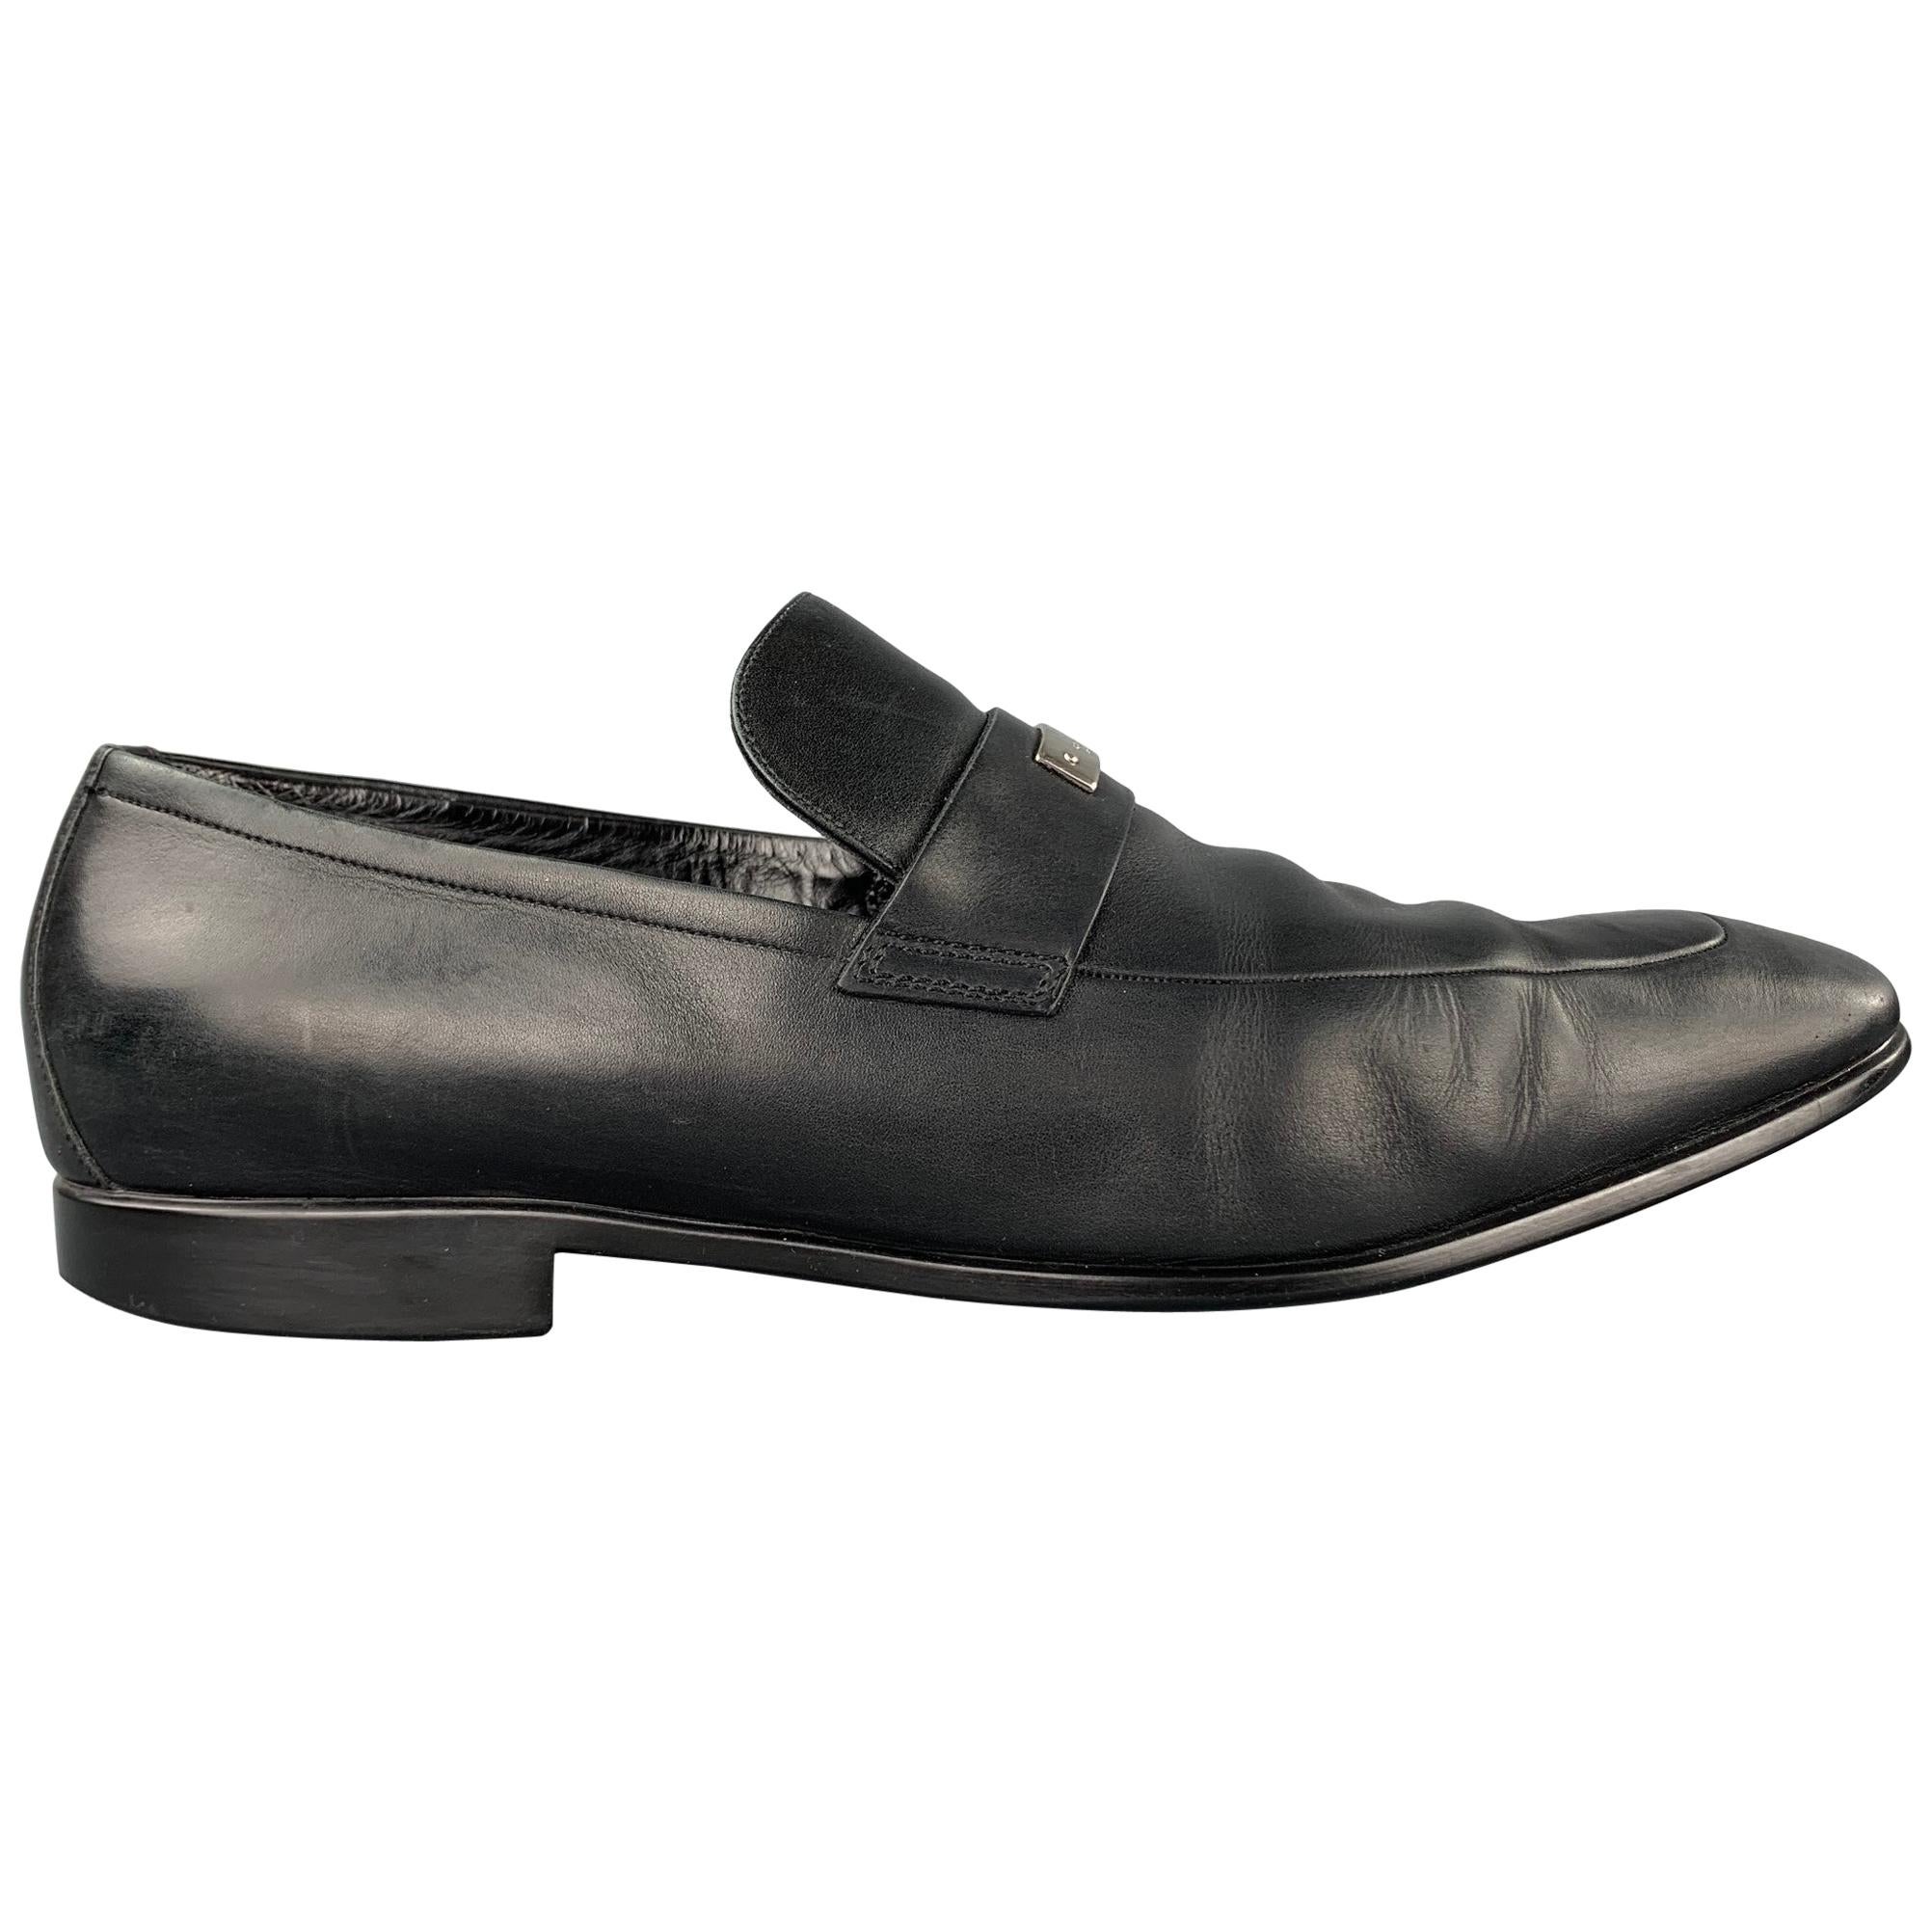 GUCCI Size 11.5 Black Leather Slip On Loafers